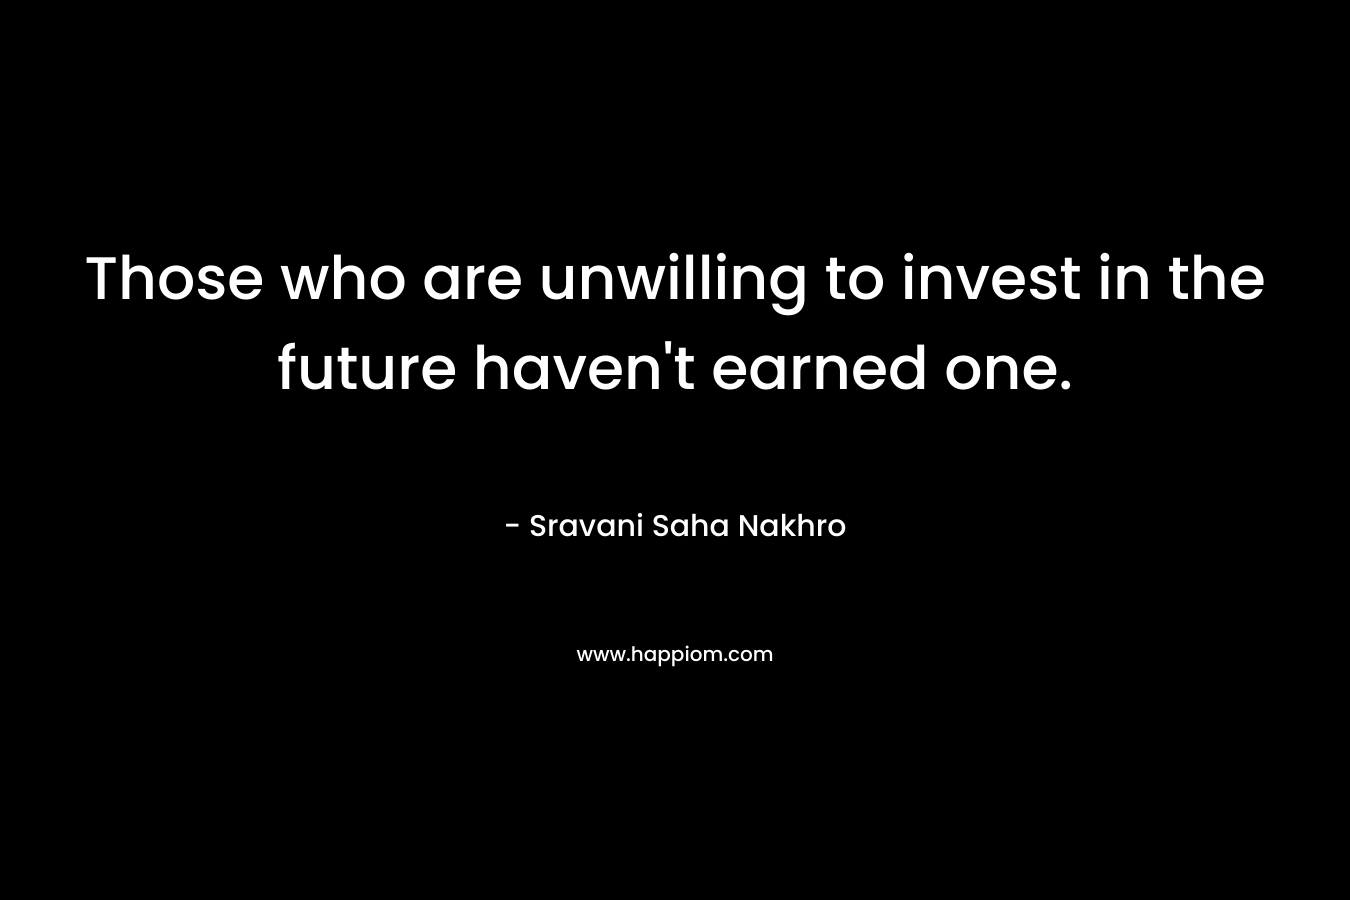 Those who are unwilling to invest in the future haven’t earned one. – Sravani Saha Nakhro